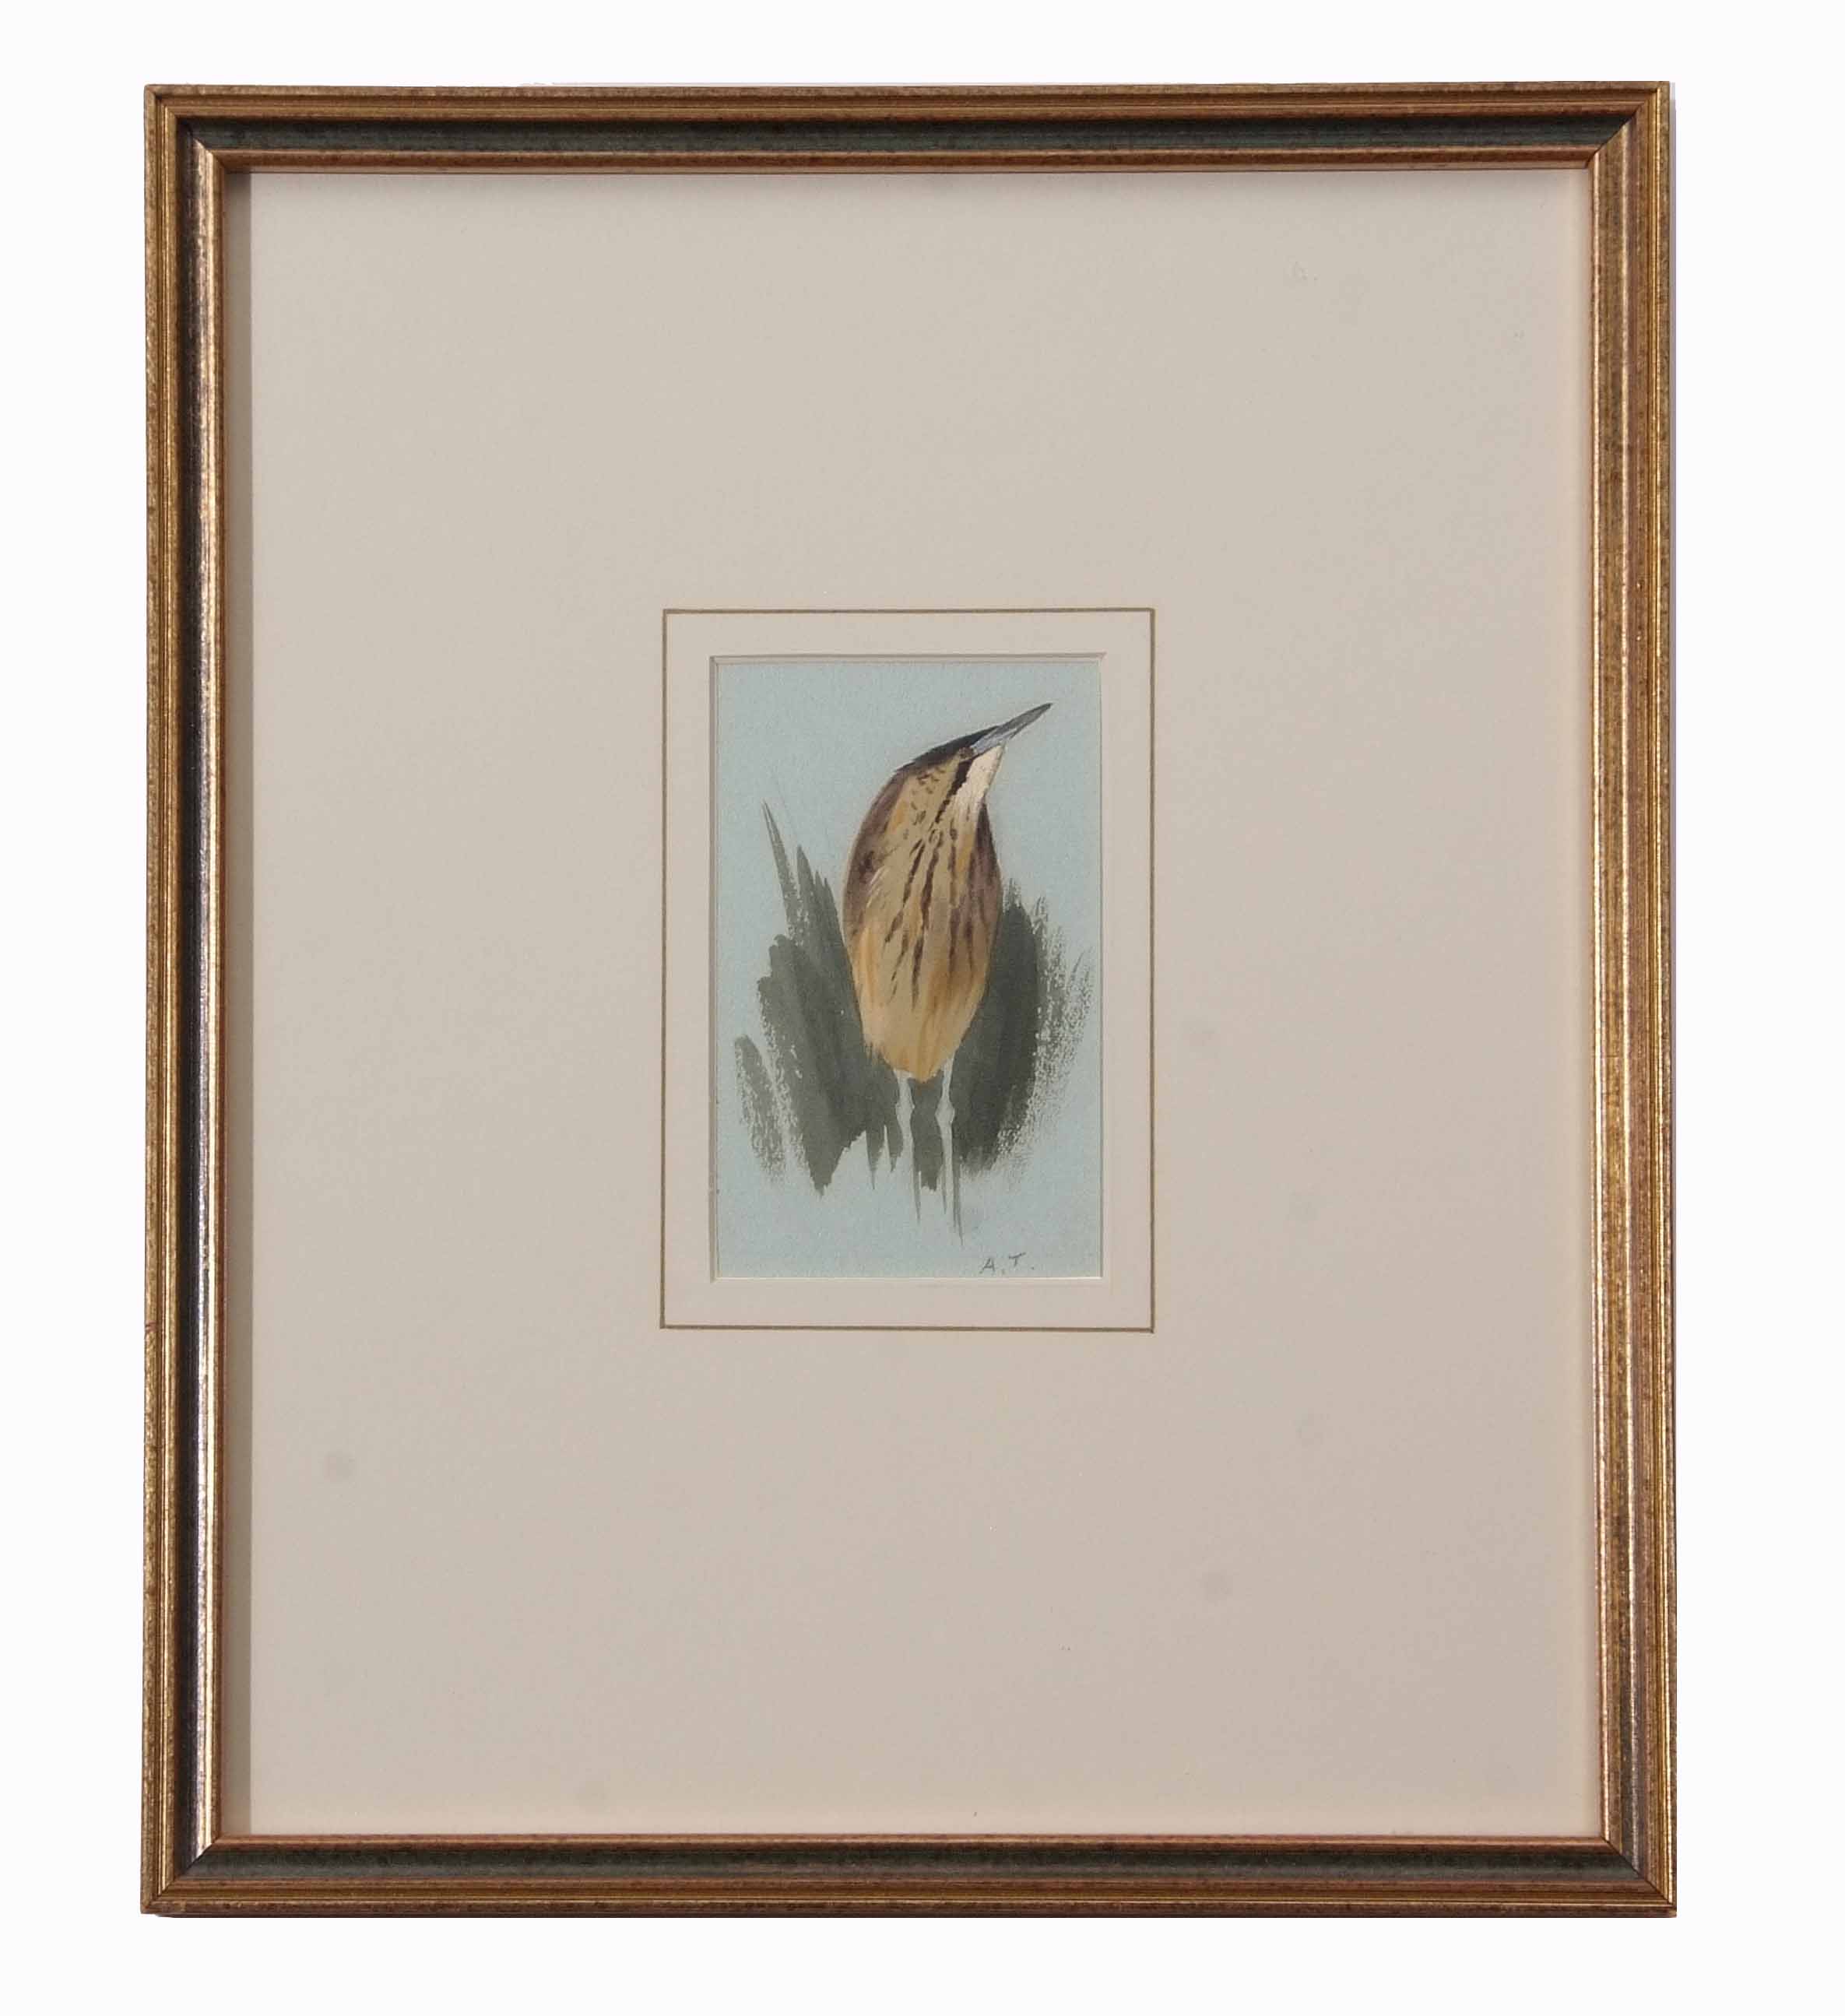 Archibald Thorburn (1860-1935) , Bittern , watercolour, initialled lower right, 11 x 7cm - Image 2 of 2